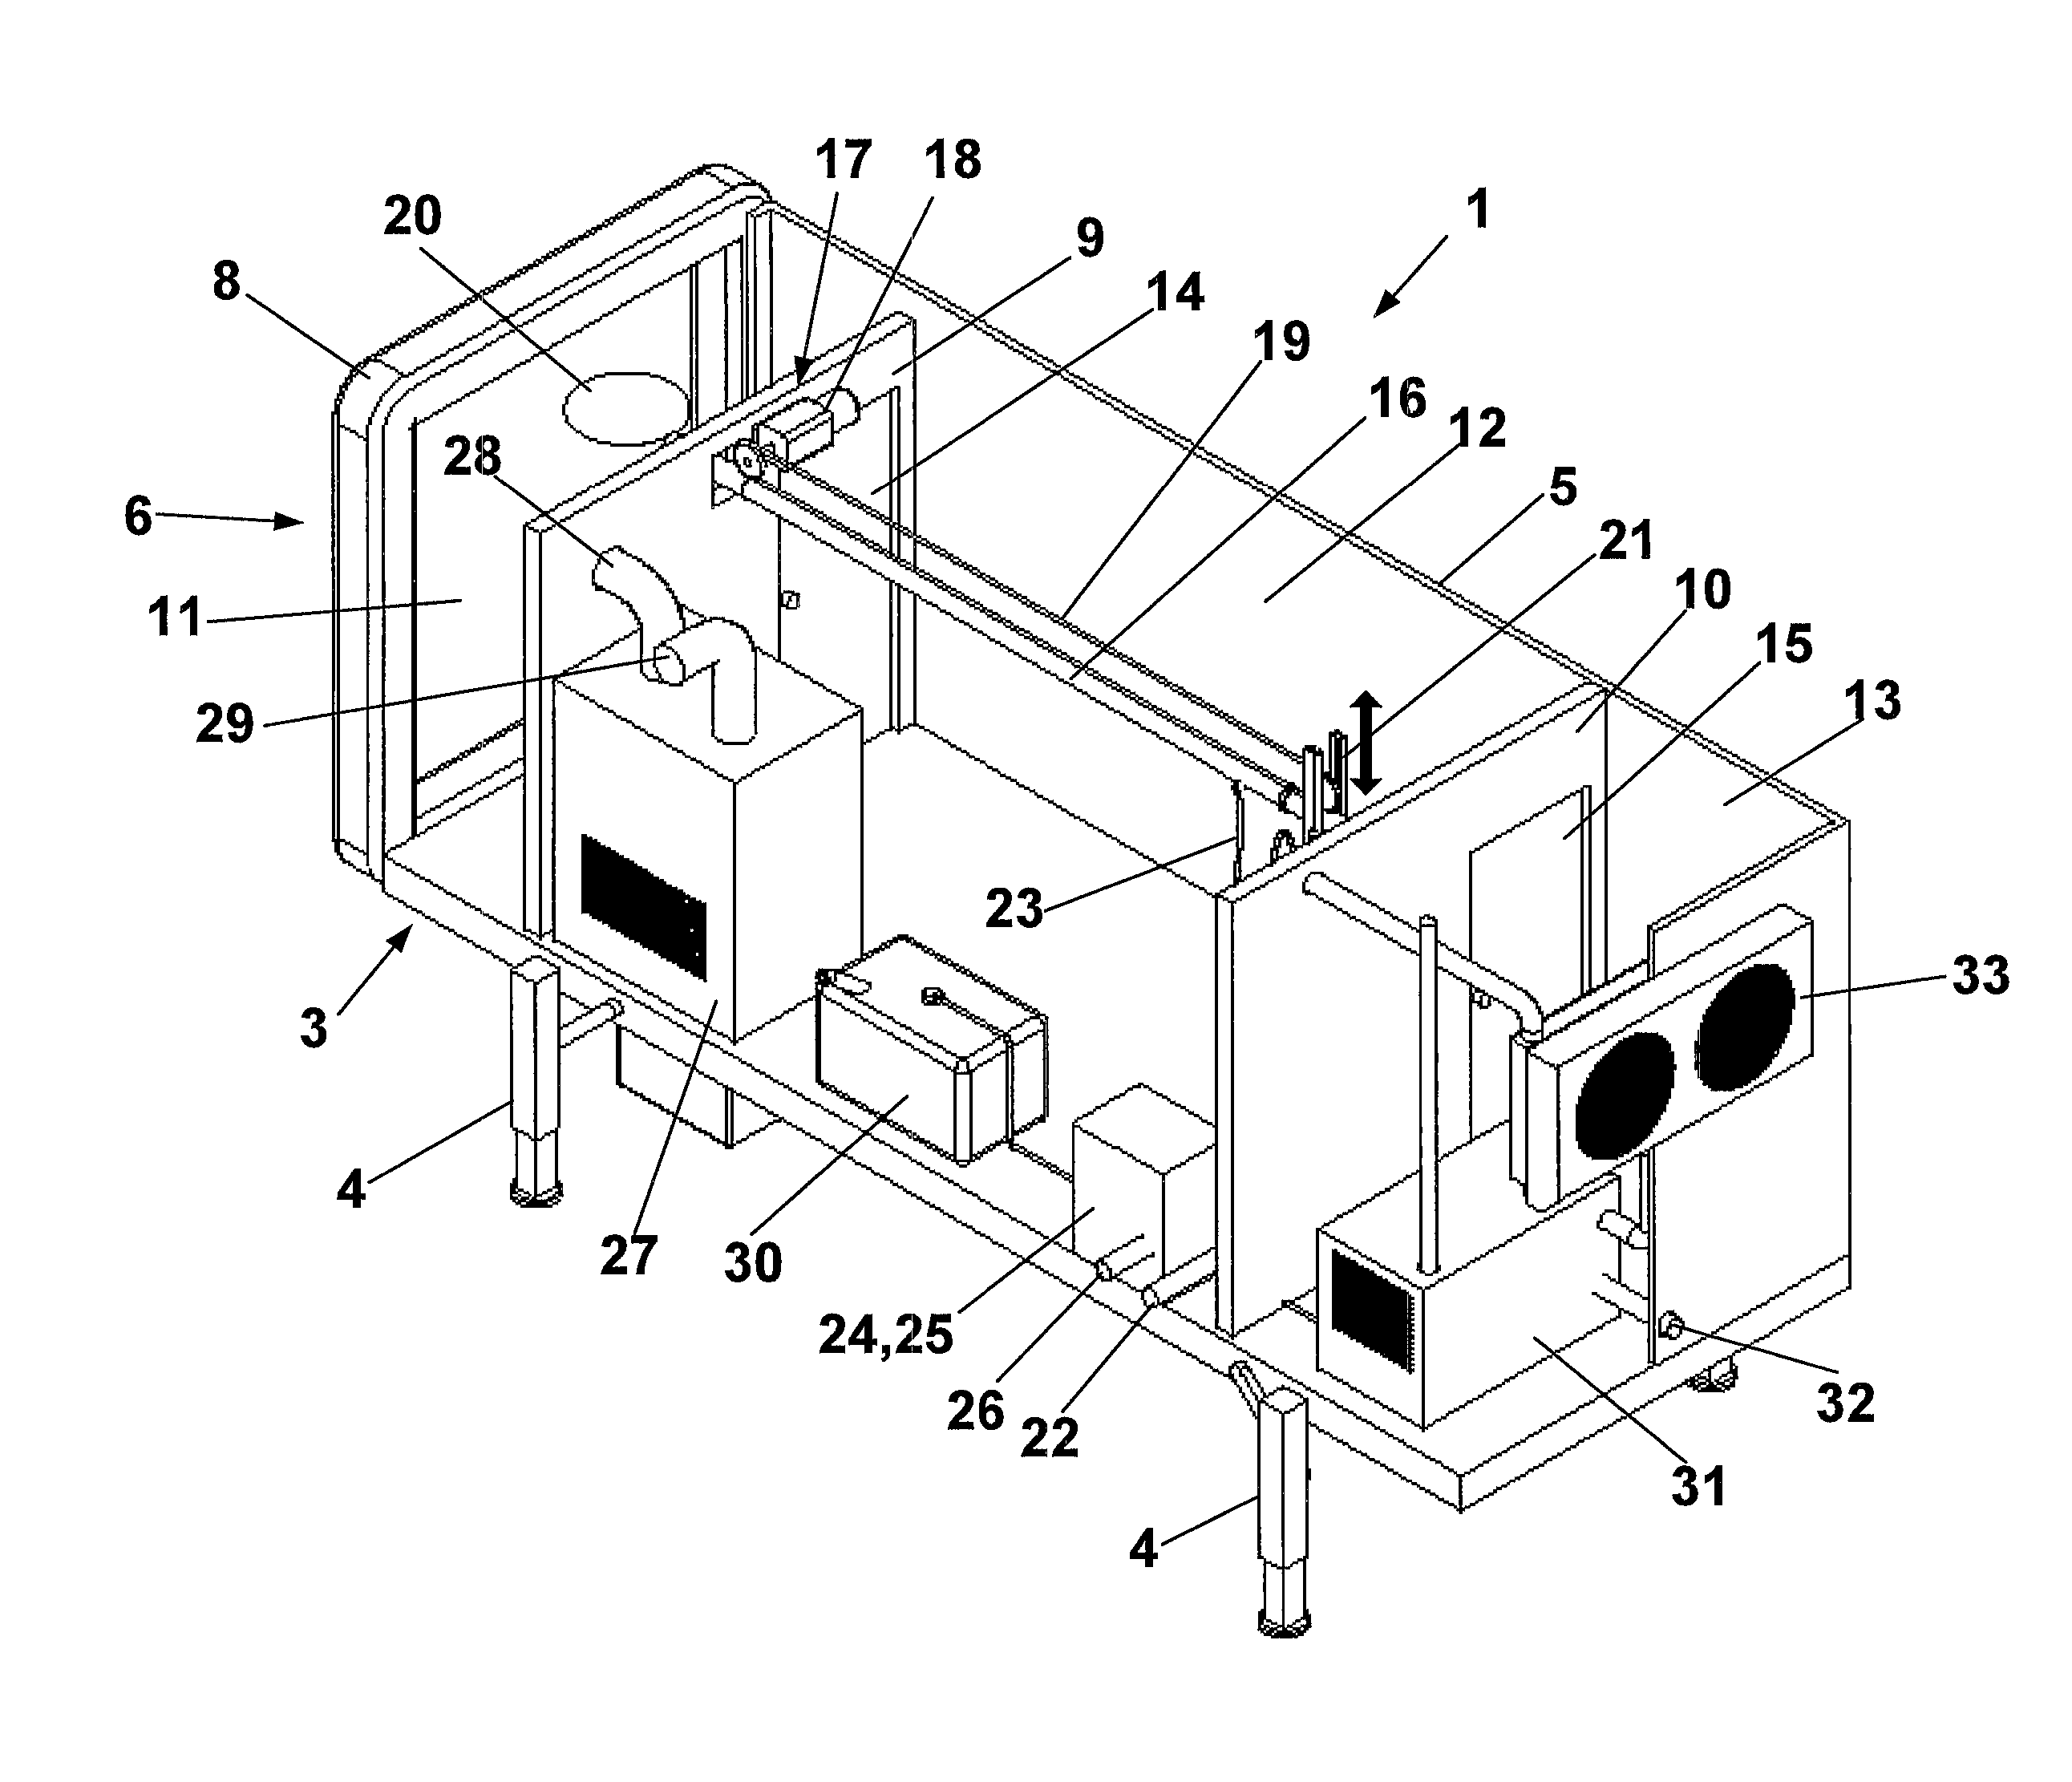 Loading and unloading device for cargo containers, silos and other vessels